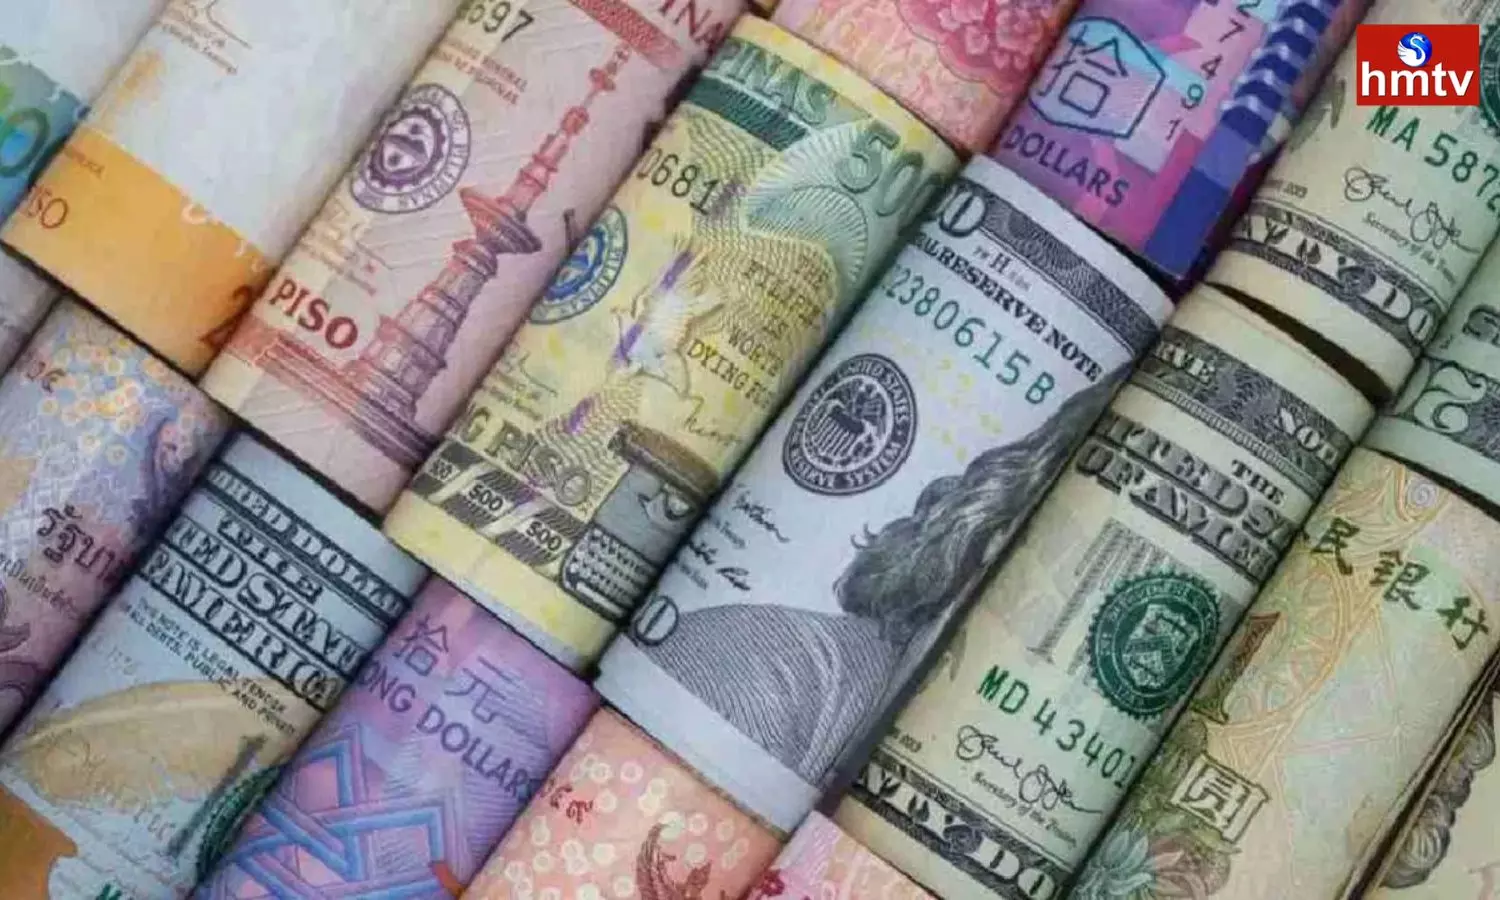 Paper Currency Appeared in 23 Countries in the World and Used Plastic Notes